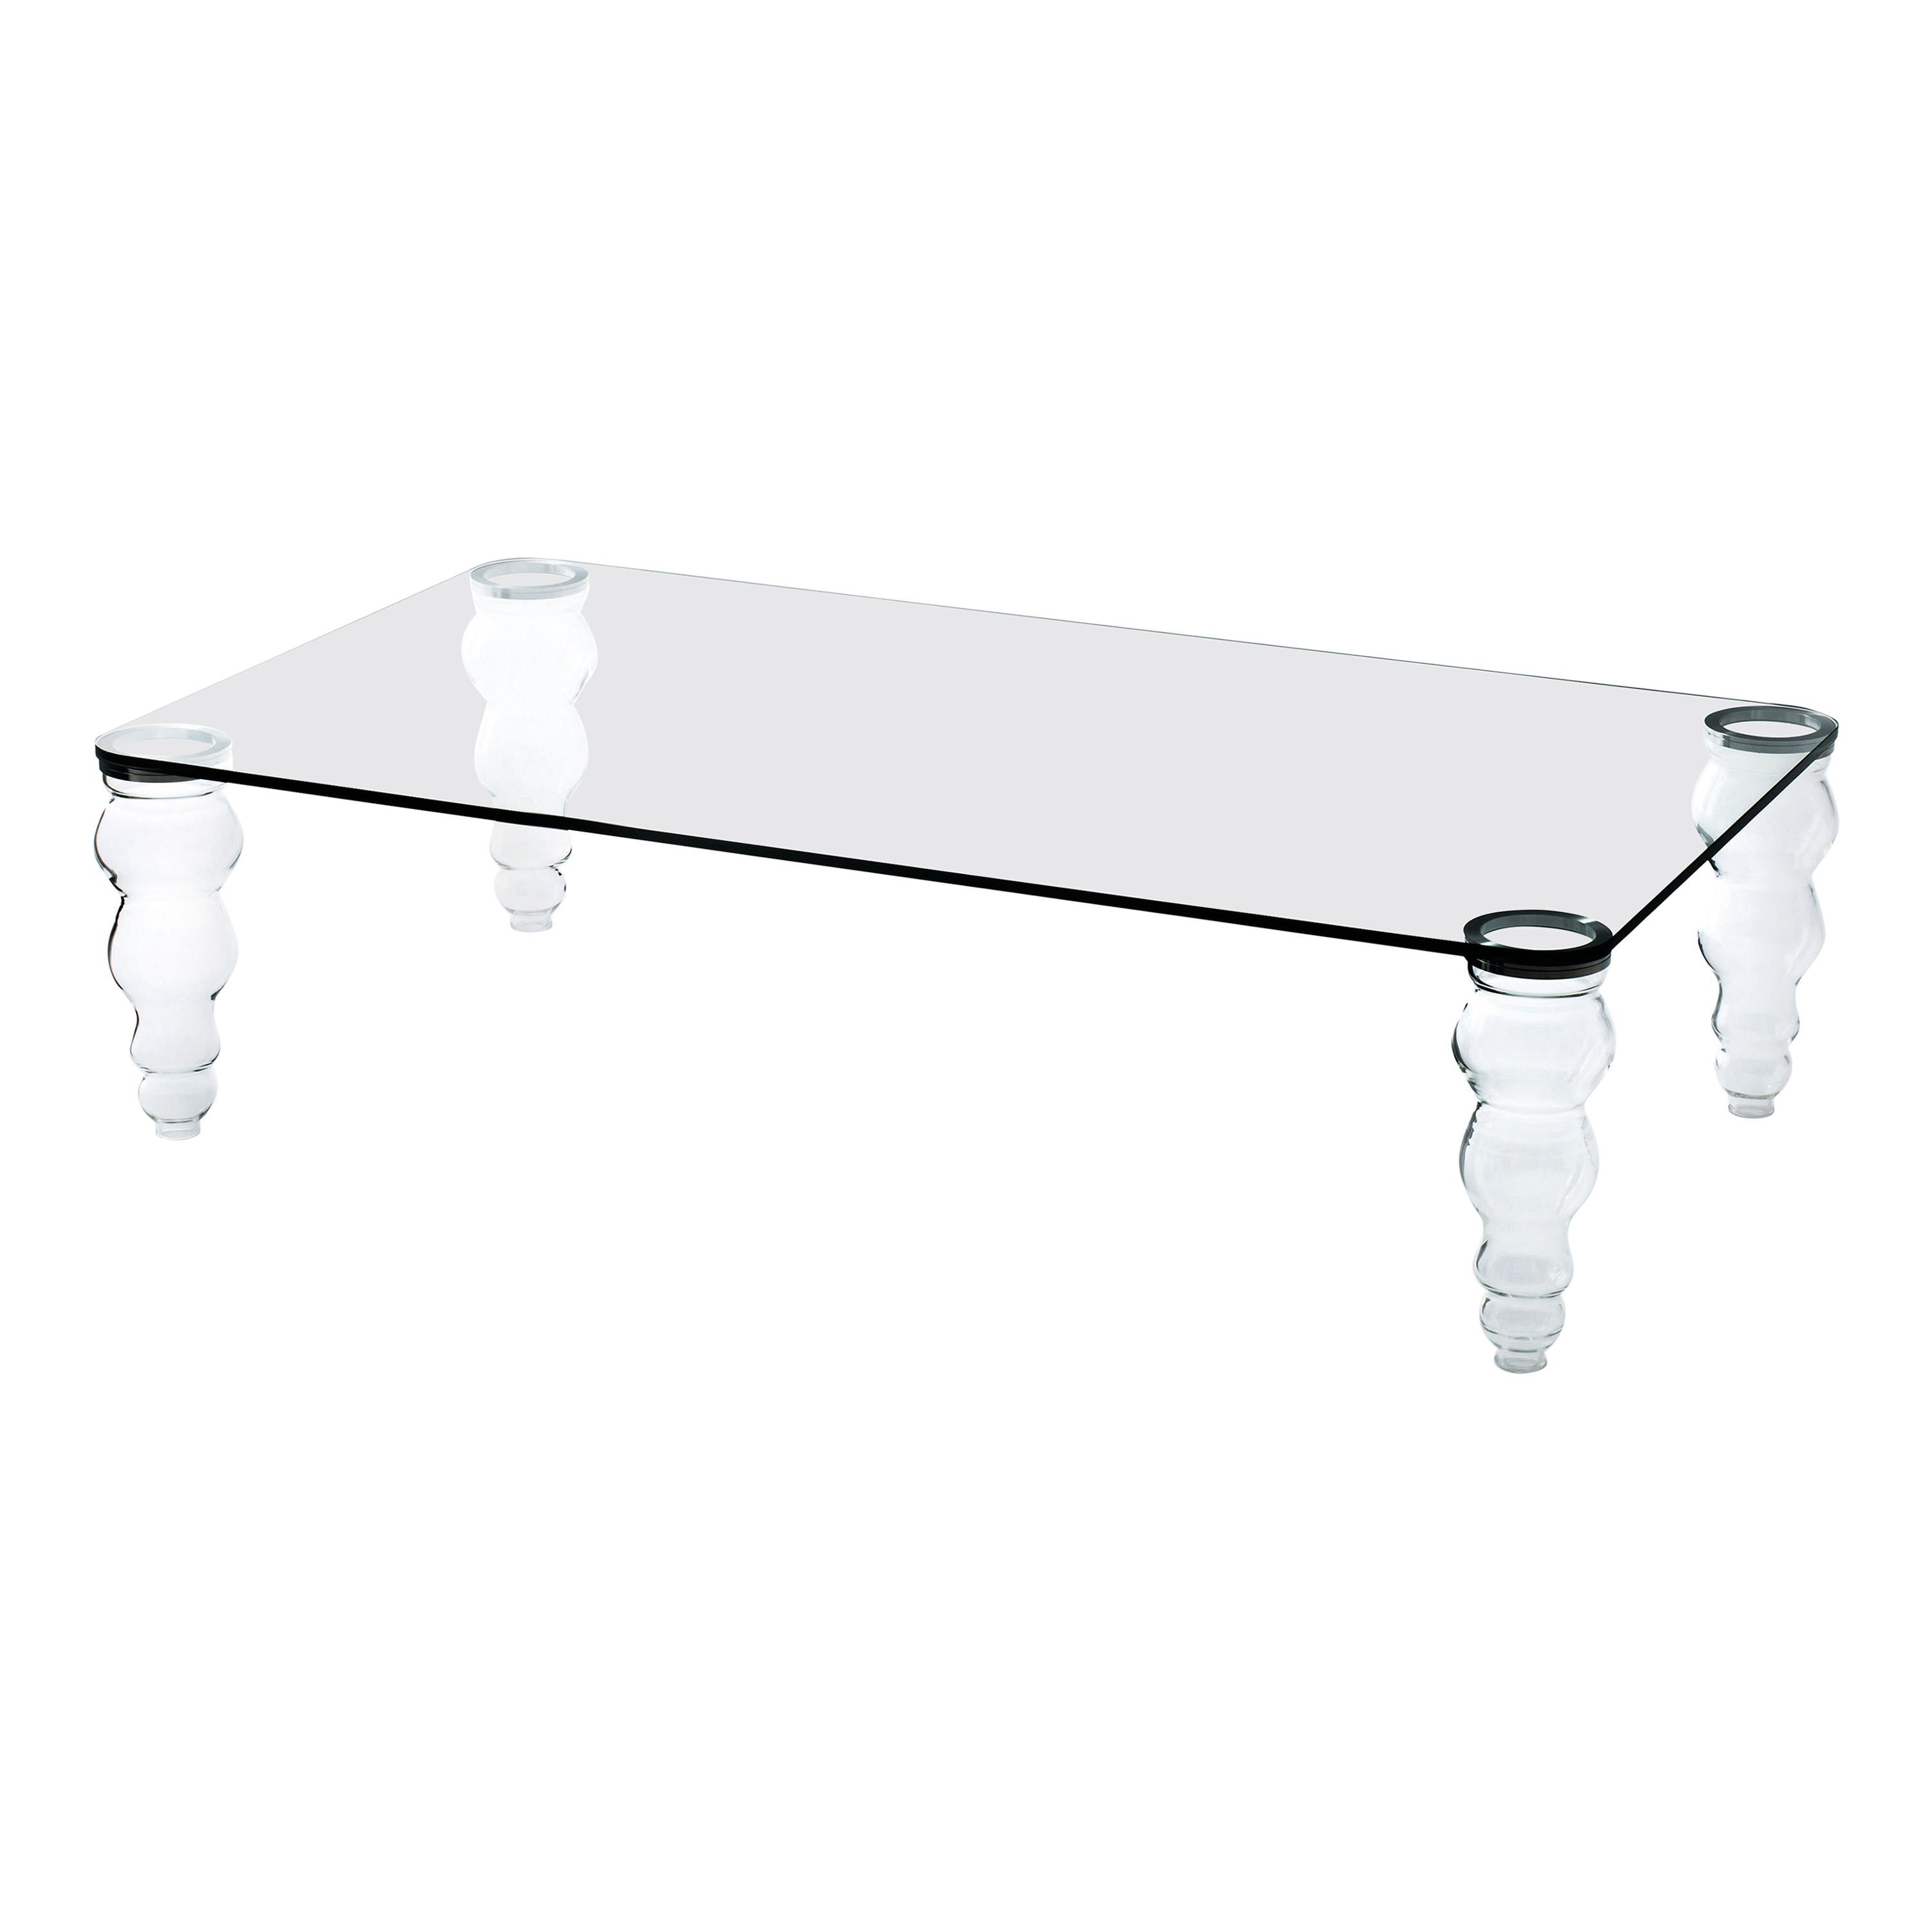 POSTMODERN Low Table in Transparent Glass, by Piero Lissoni for Glas Italia